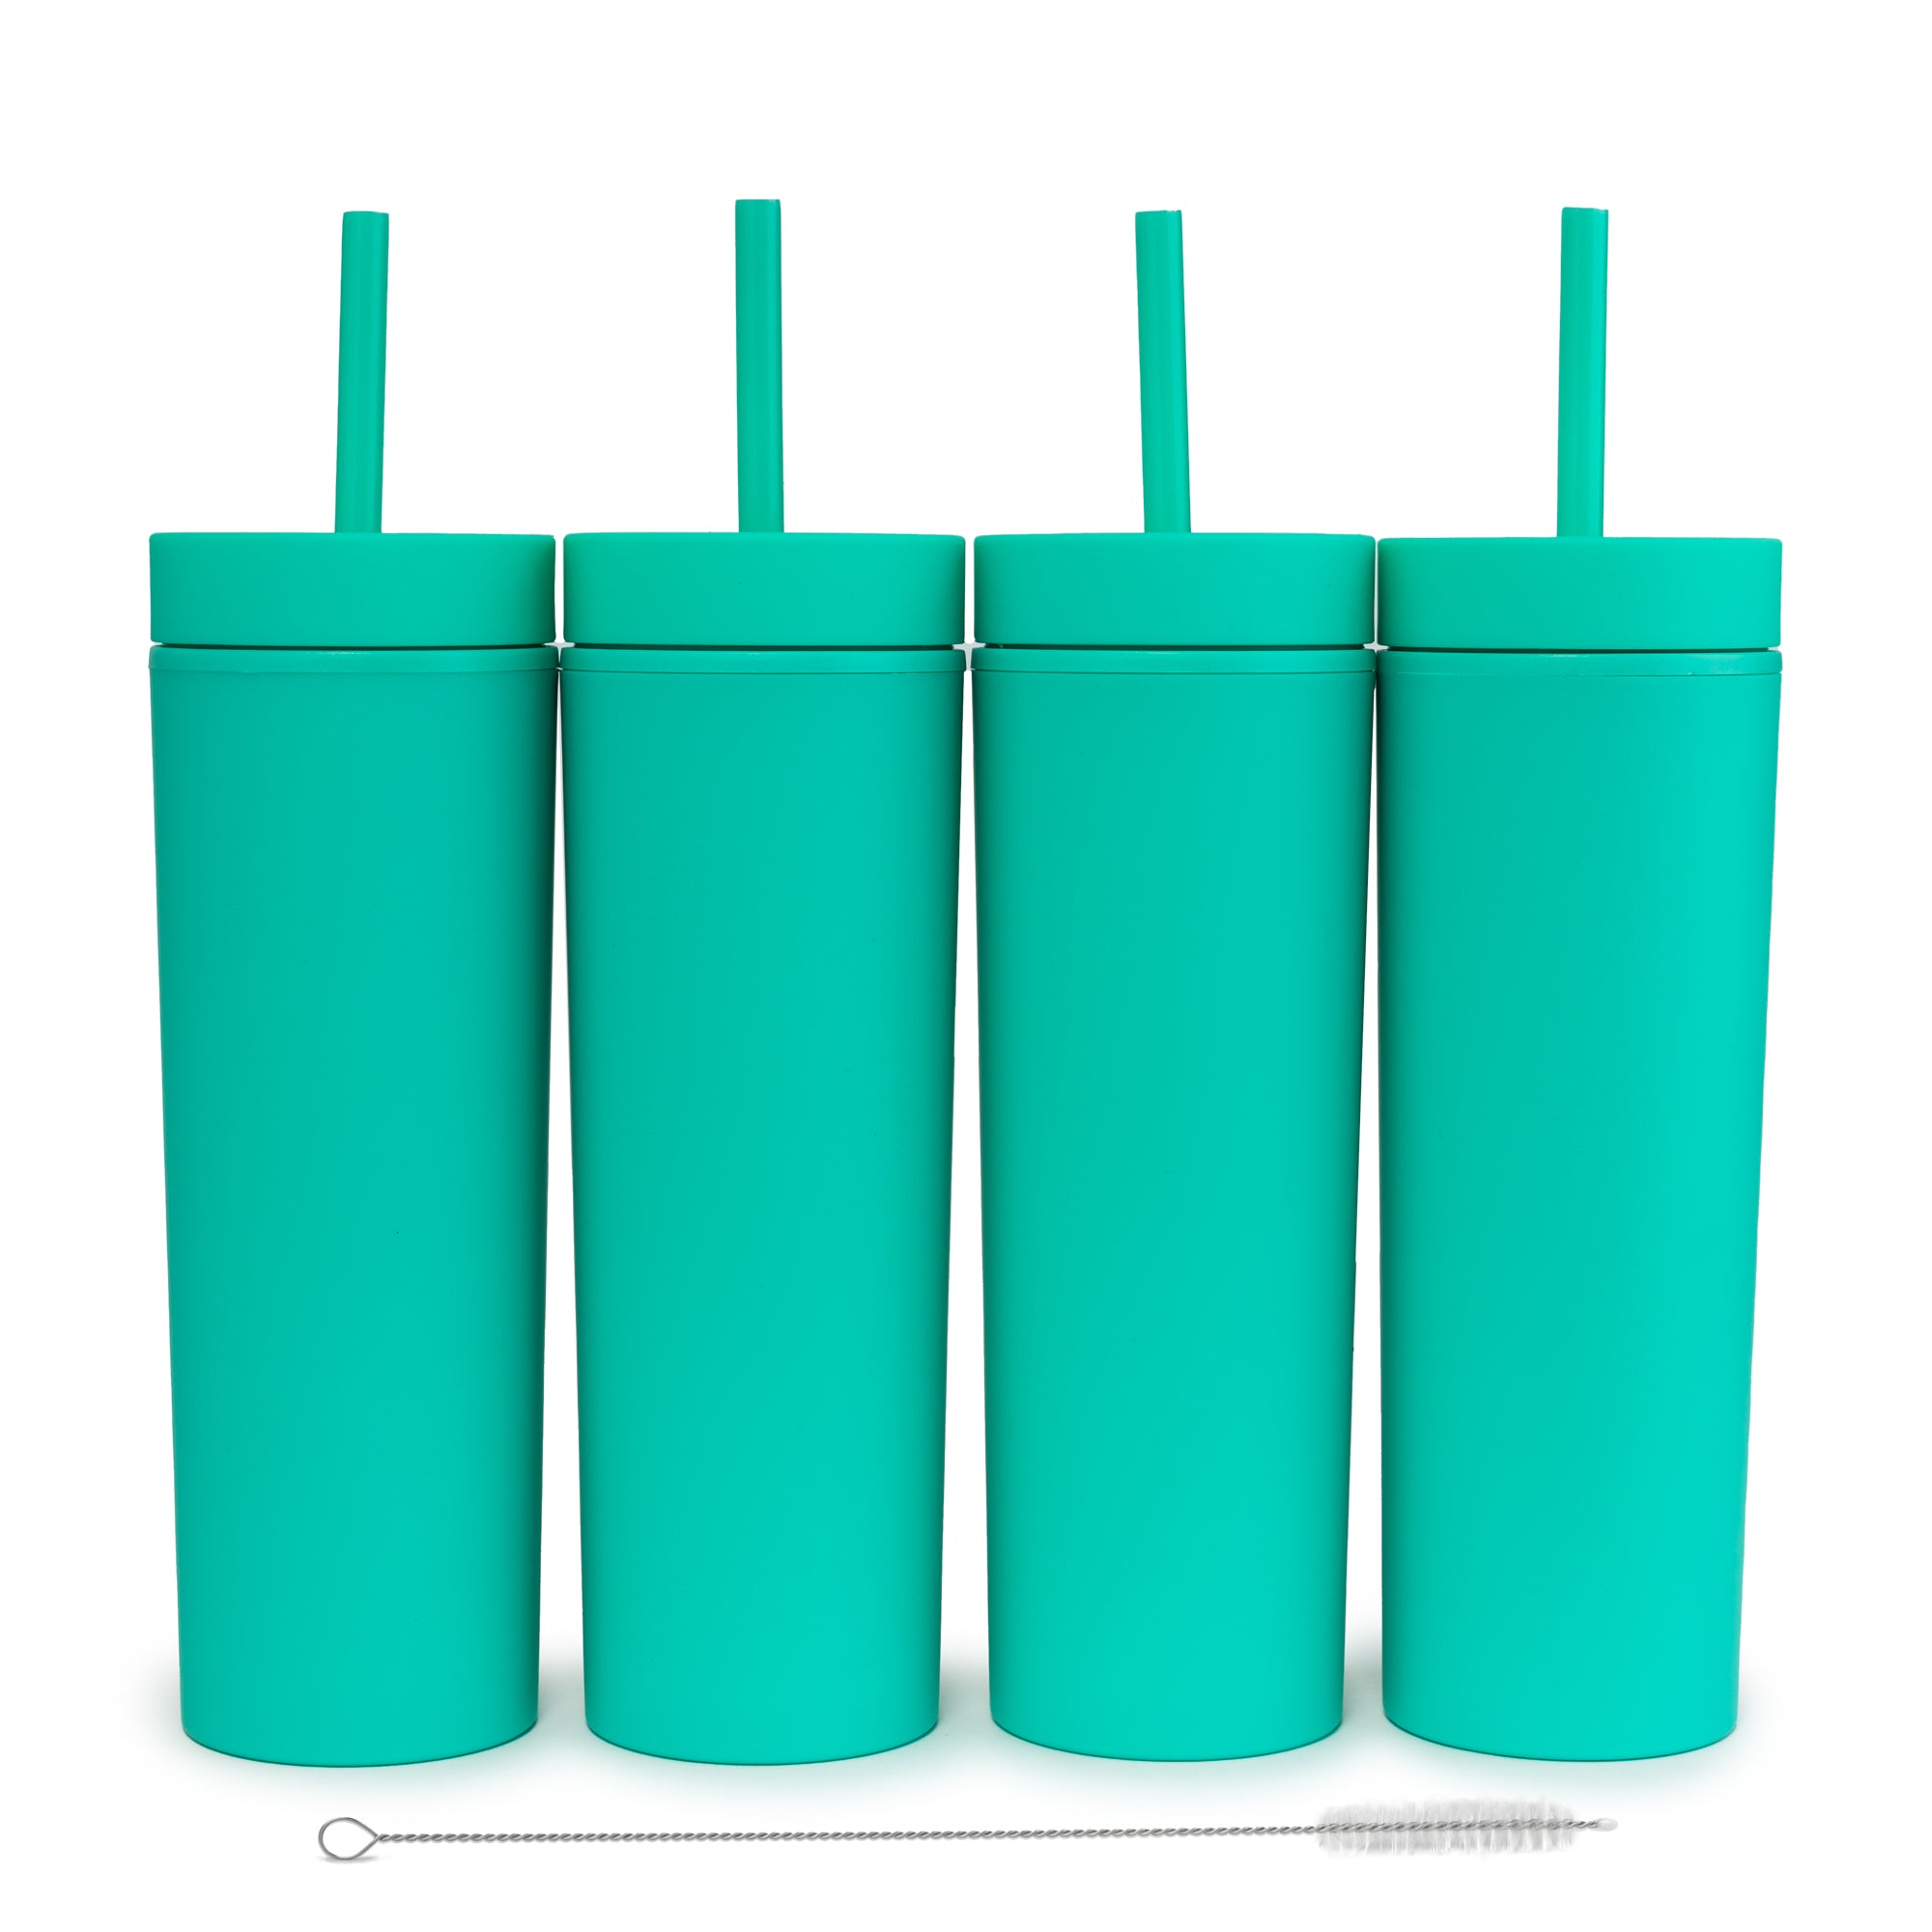 STRATA CUPS SKINNY TUMBLERS (4 pack) Matte Pastel Colored